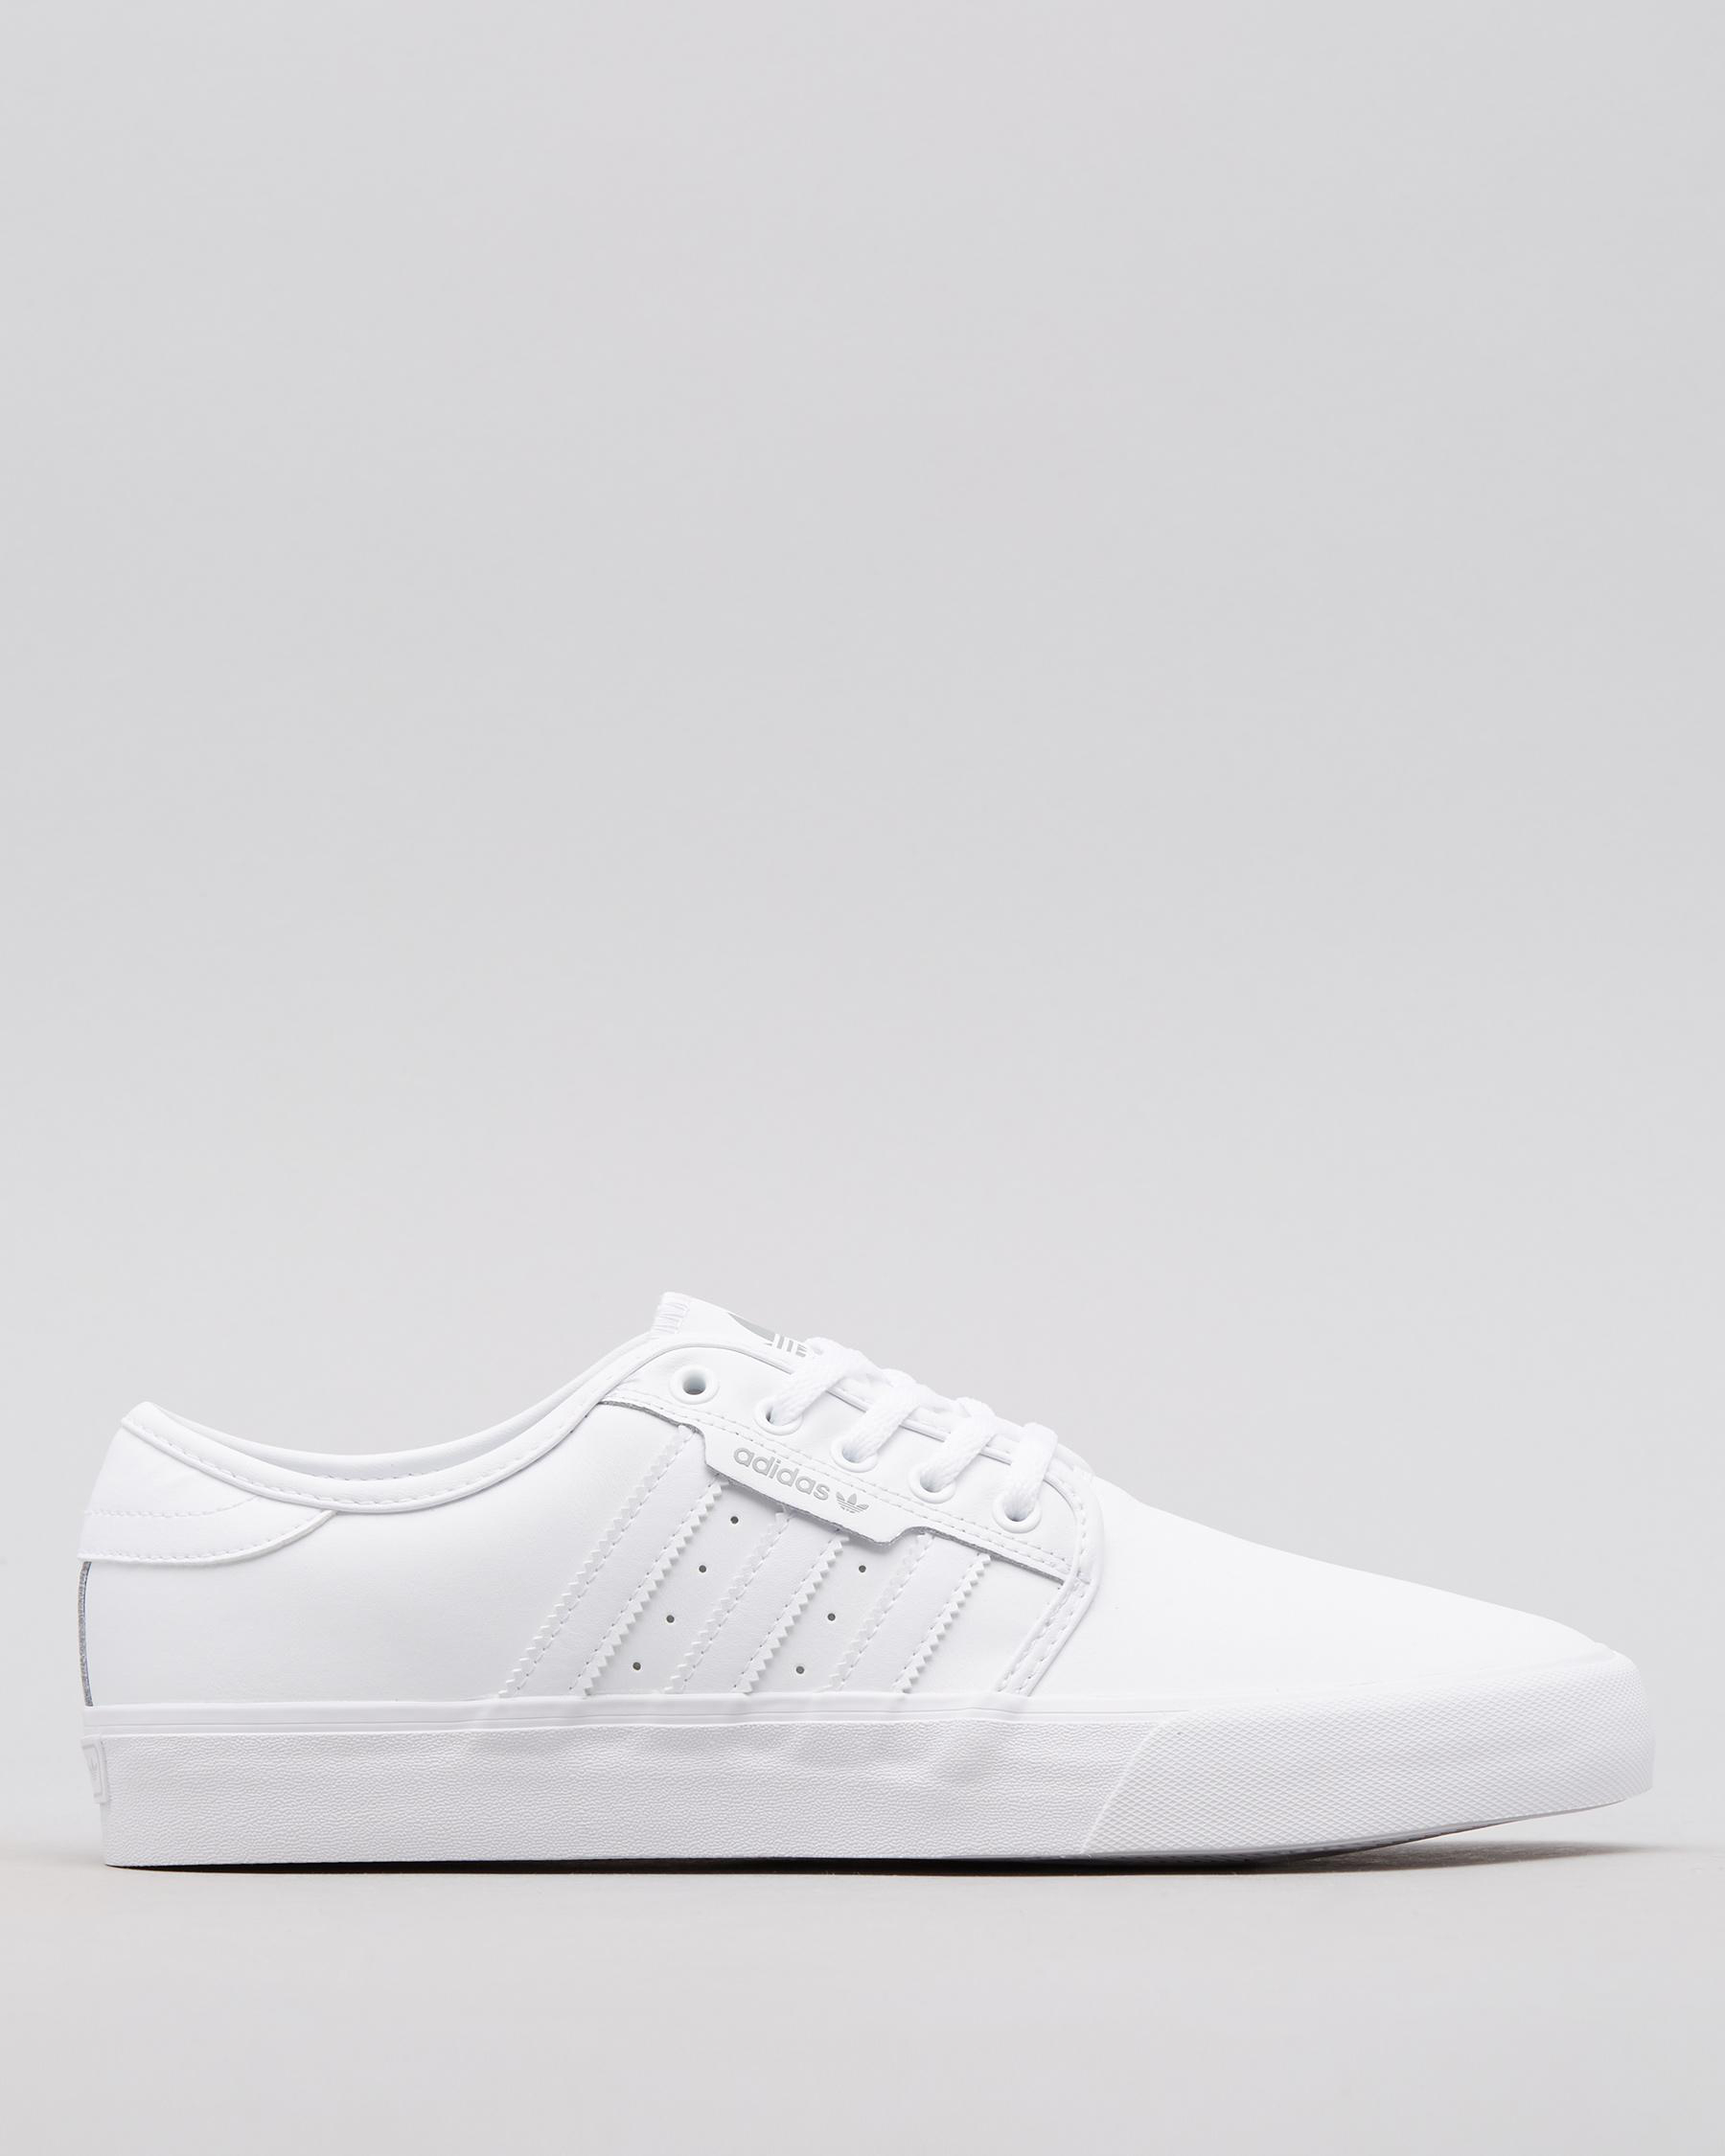 Adidas Seeley Shoes In Ftwr White/ftwr White/ftwr Whi - Fast Shipping ...